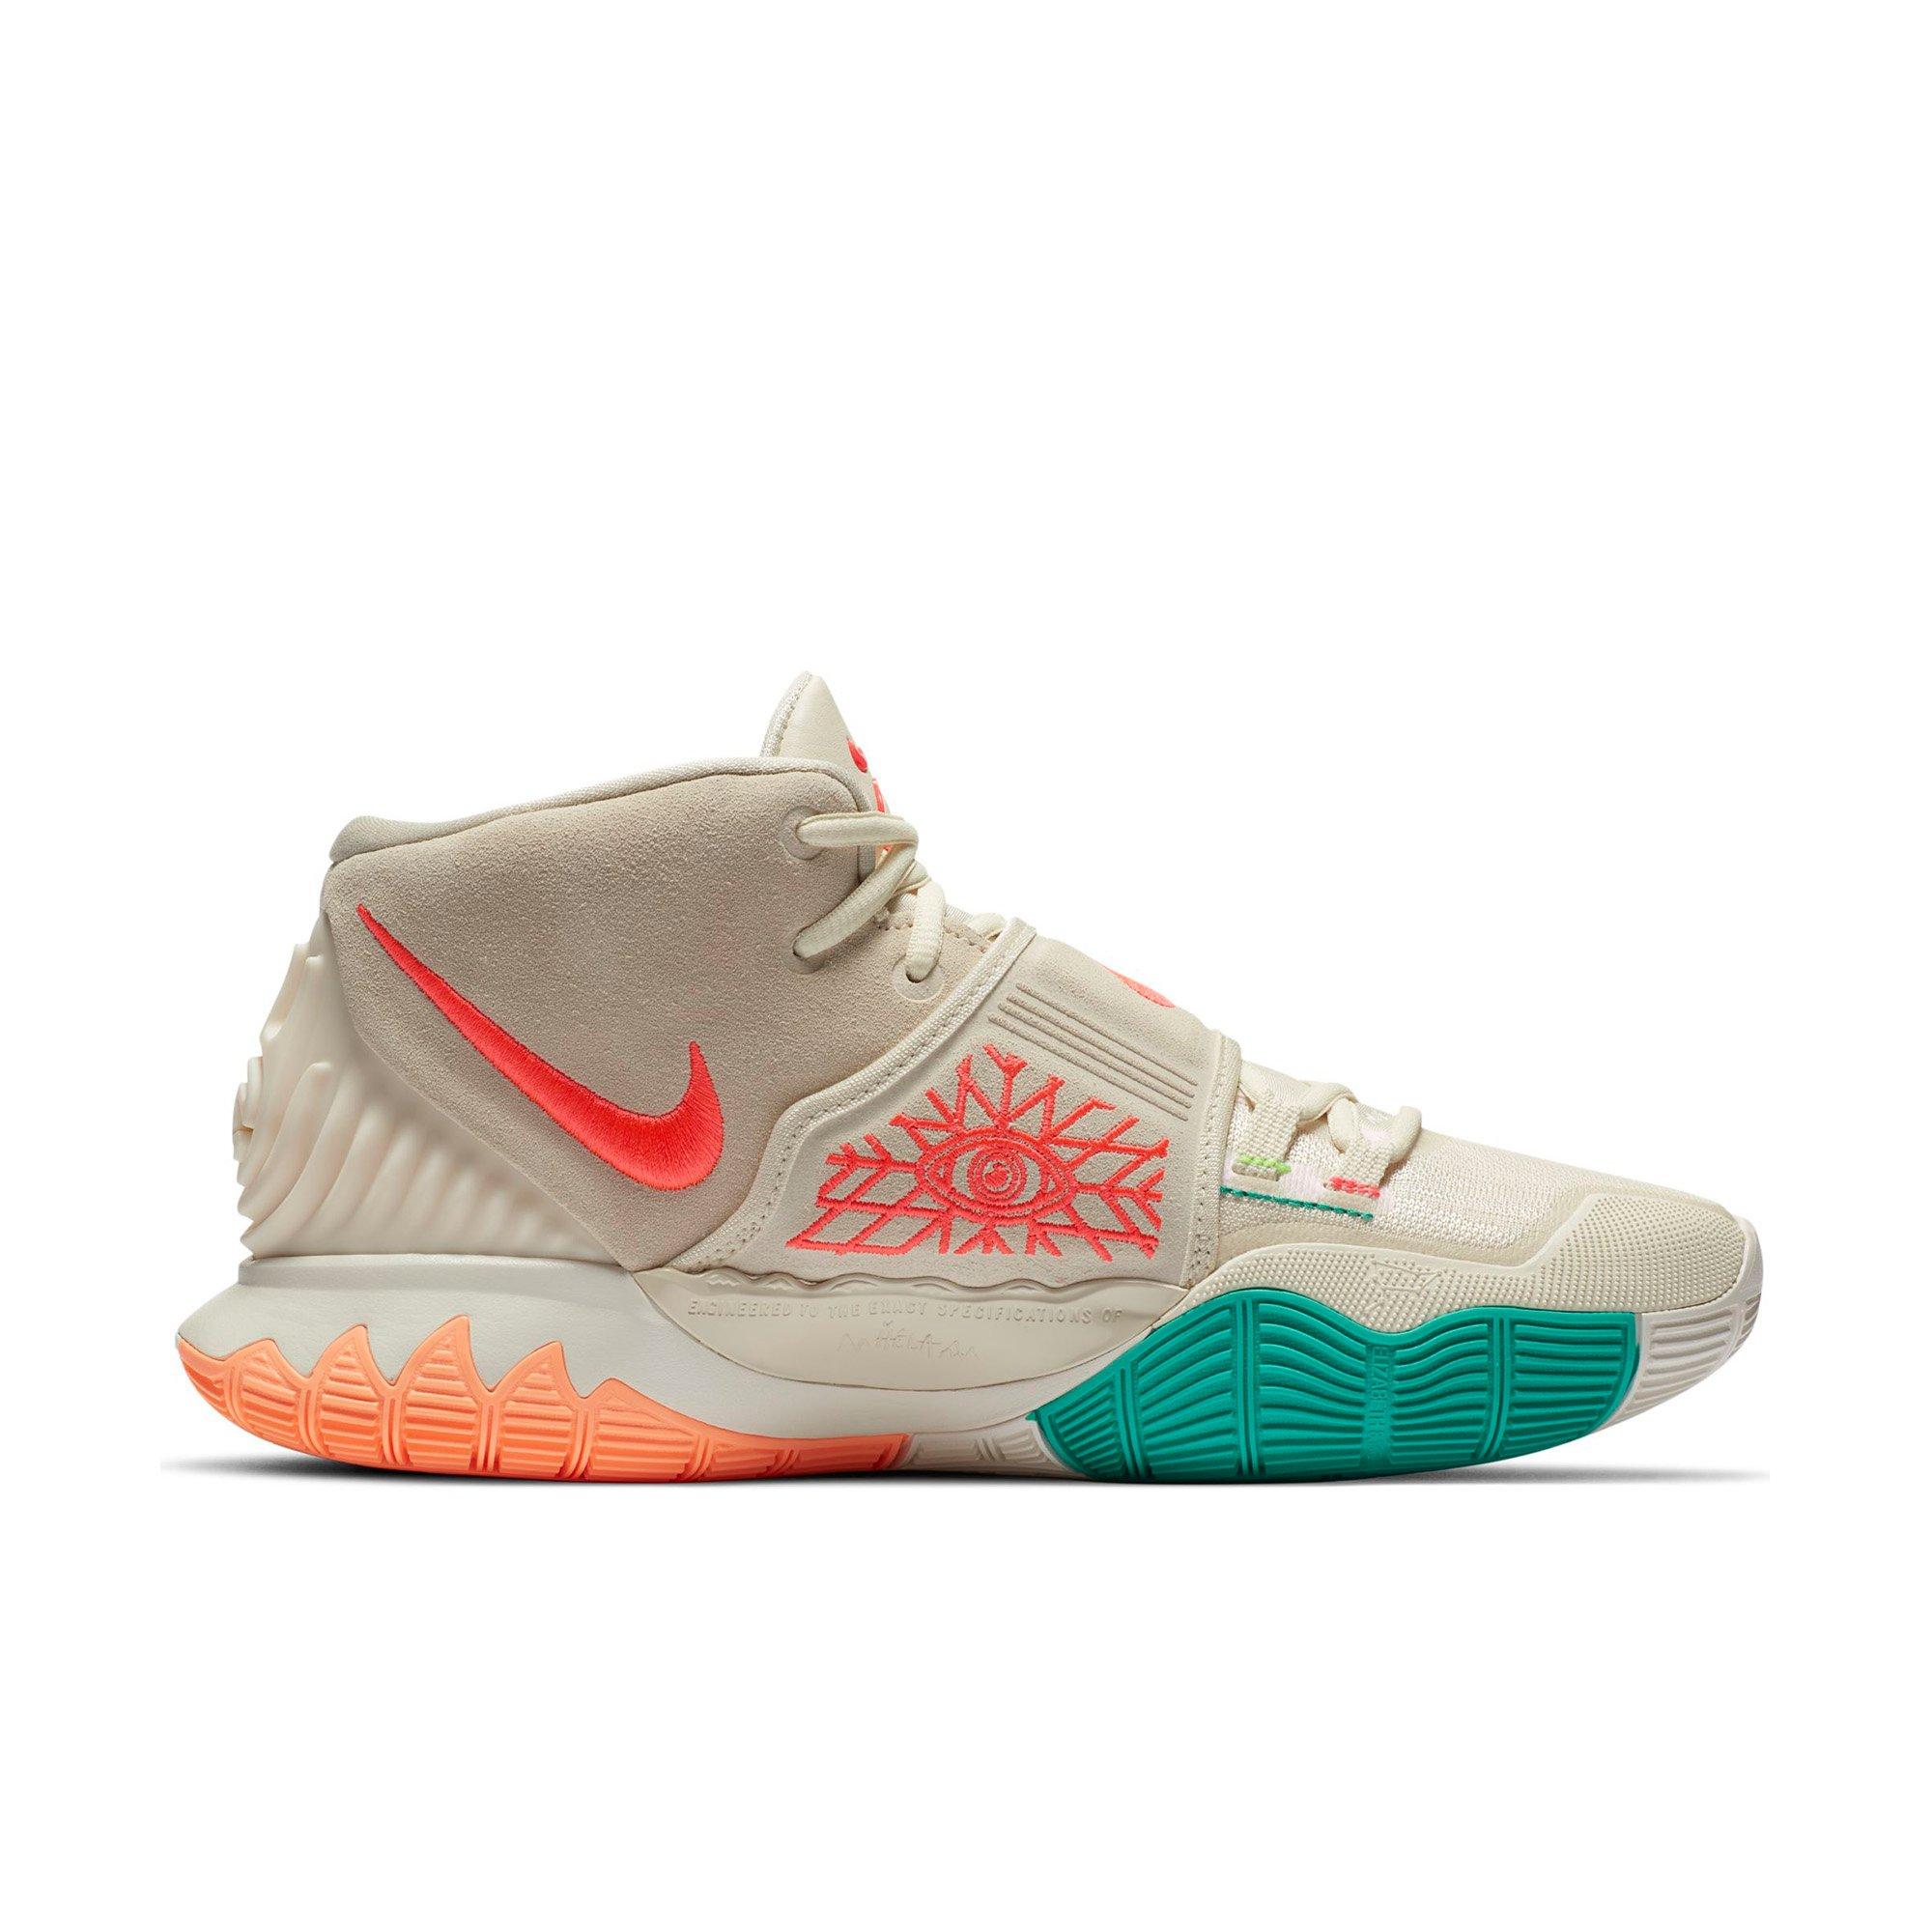 mens basketball shoes kyrie